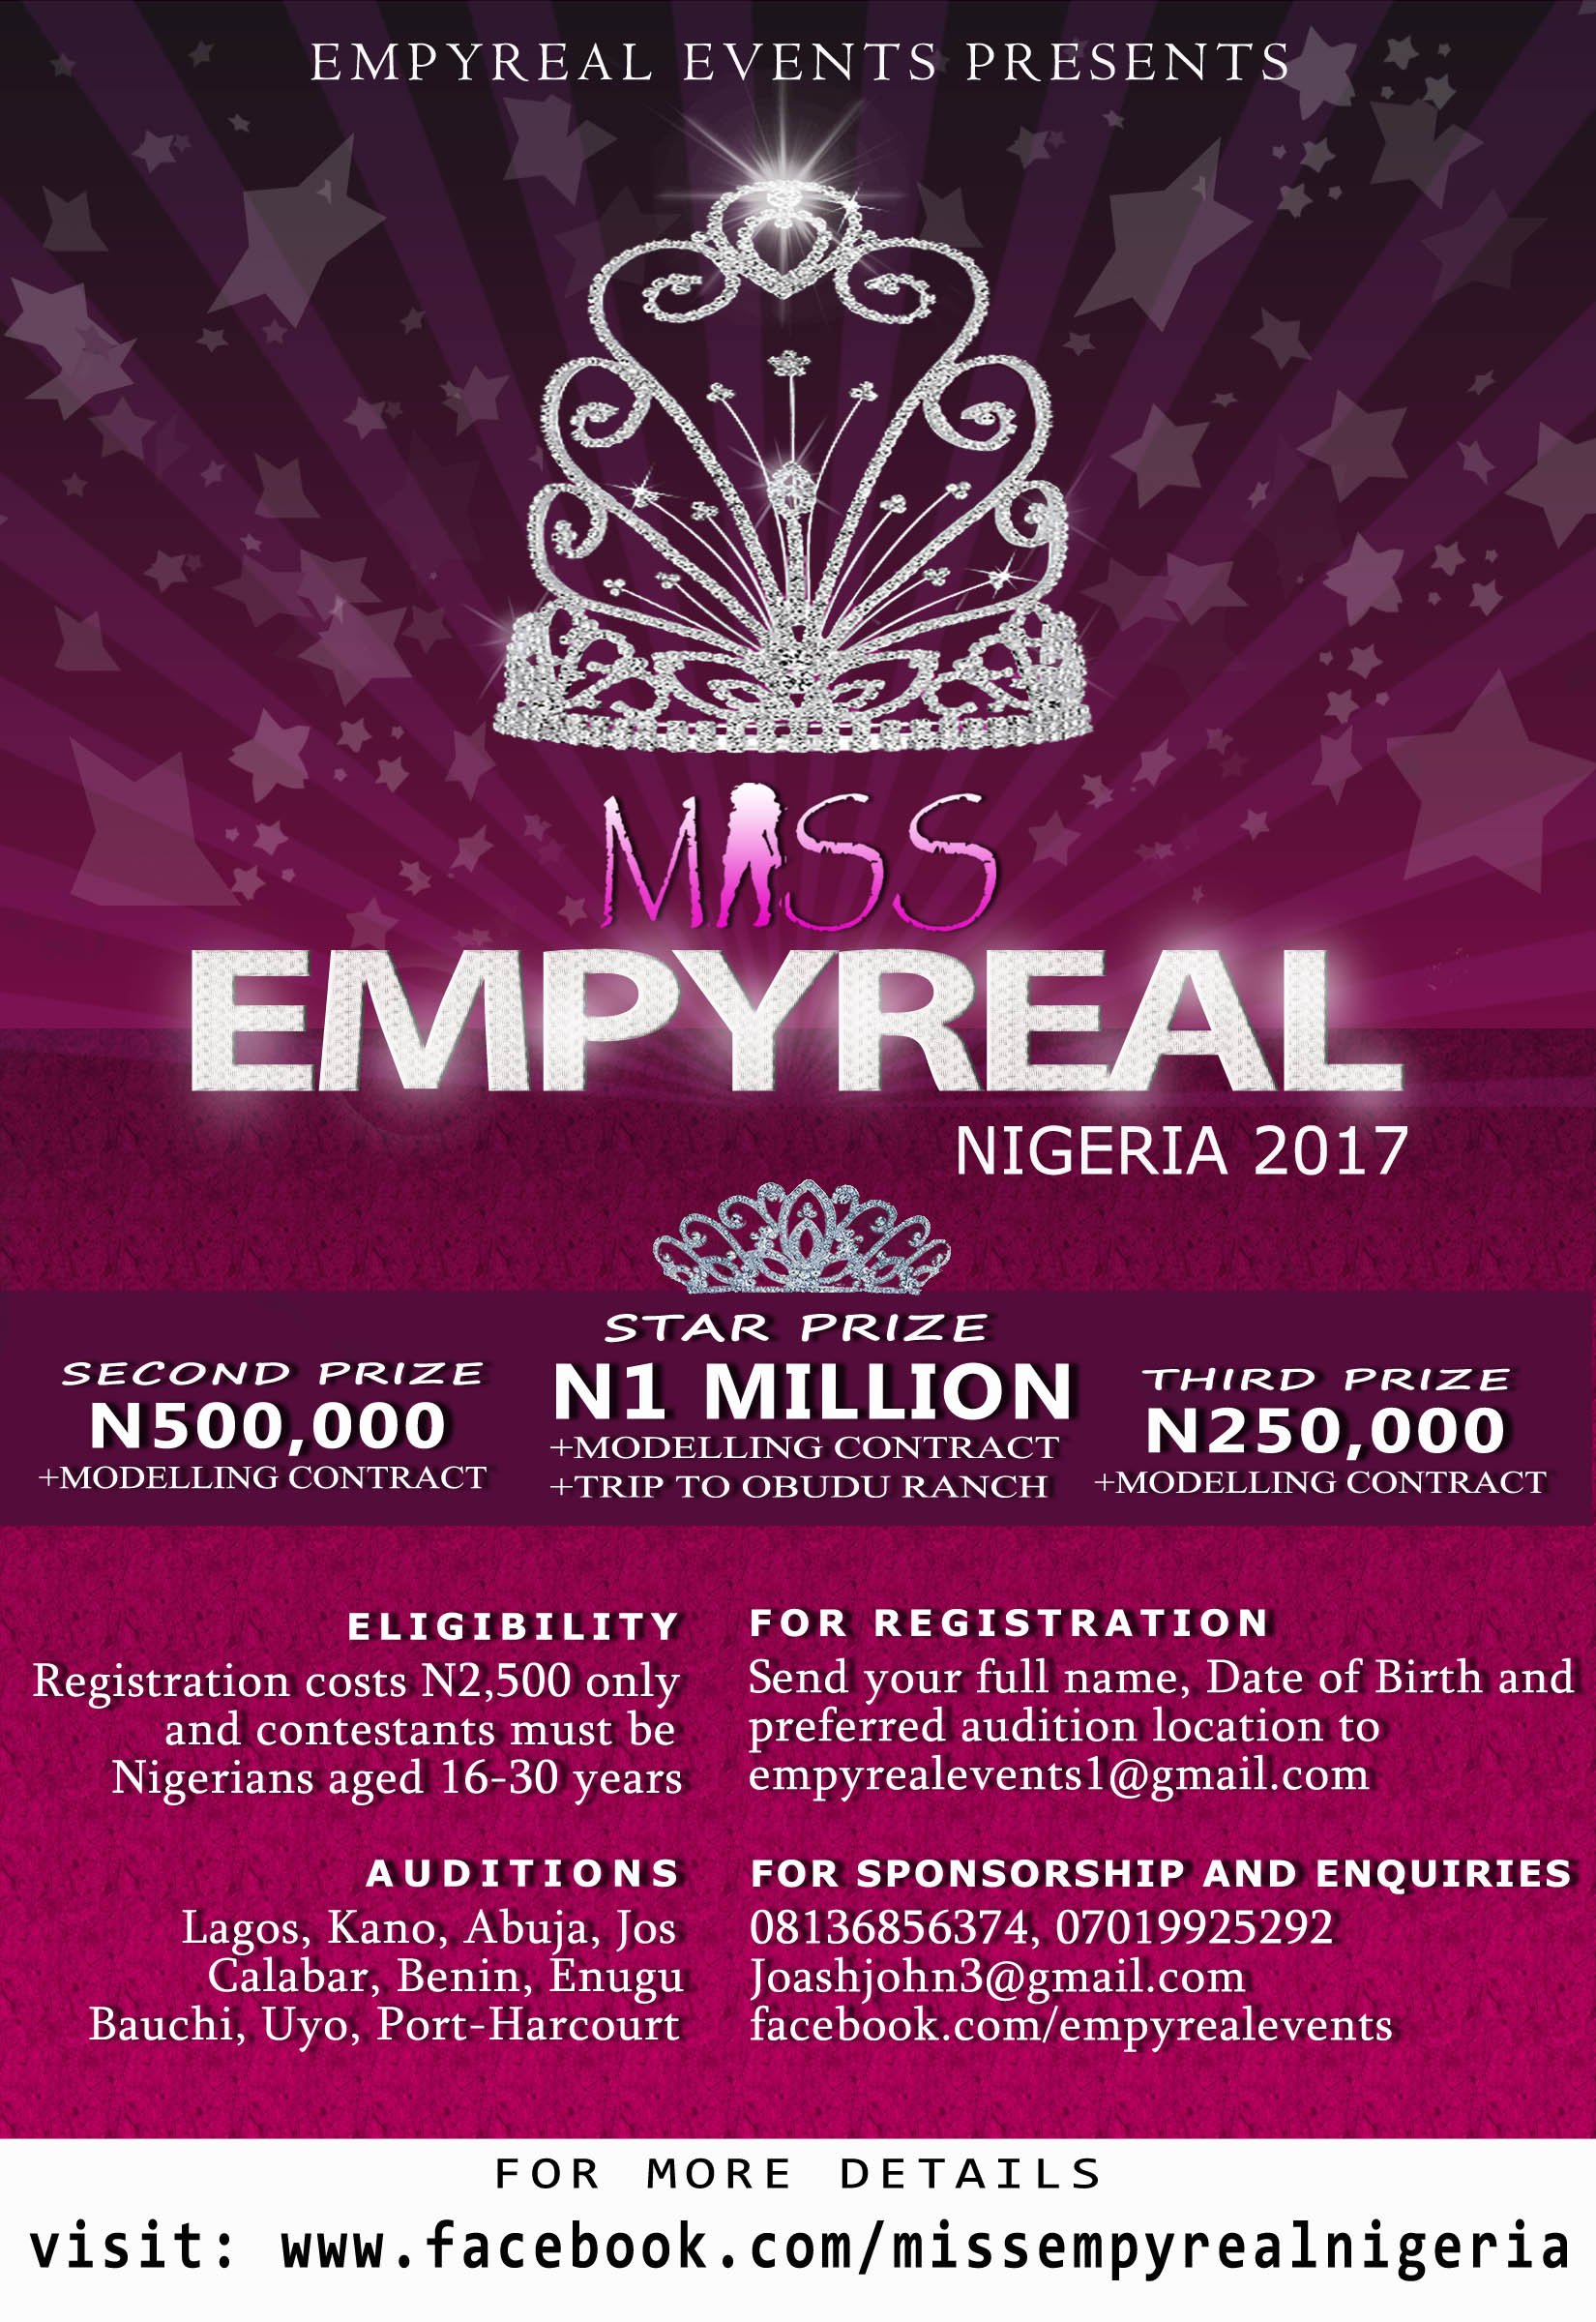 EMPYREAL EVENTS TO CROWN THE QUEEN OF NIGERIA IN THE MAIDEN EDITION OF MISS EMPYREAL NIGERIA